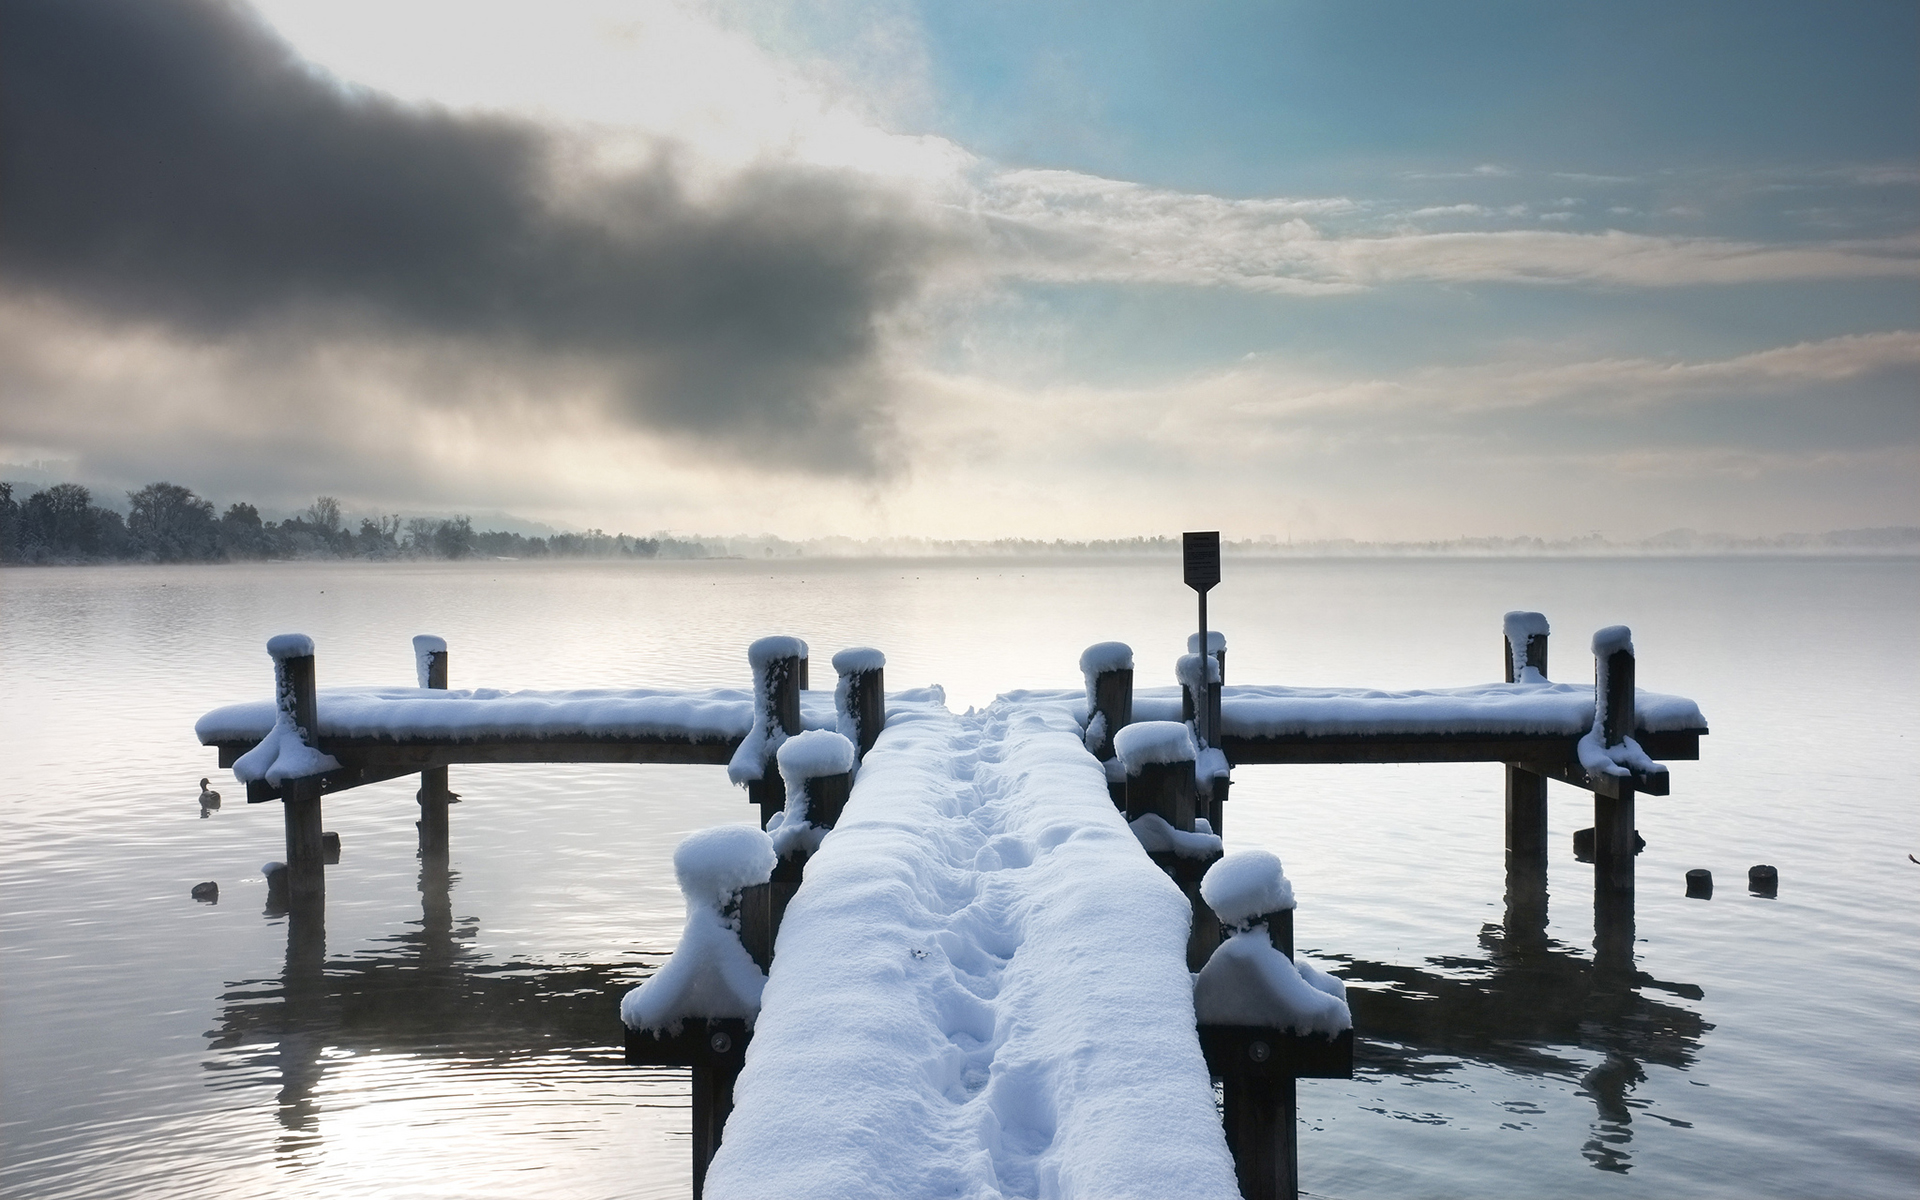 nature, Lakes, Water, Reflection, Dock, Pier, Winter, Snow, Seasons, Cold, Animals, Birds, Duckes, Sky, Clouds, Shore, Coast, Trees Wallpaper